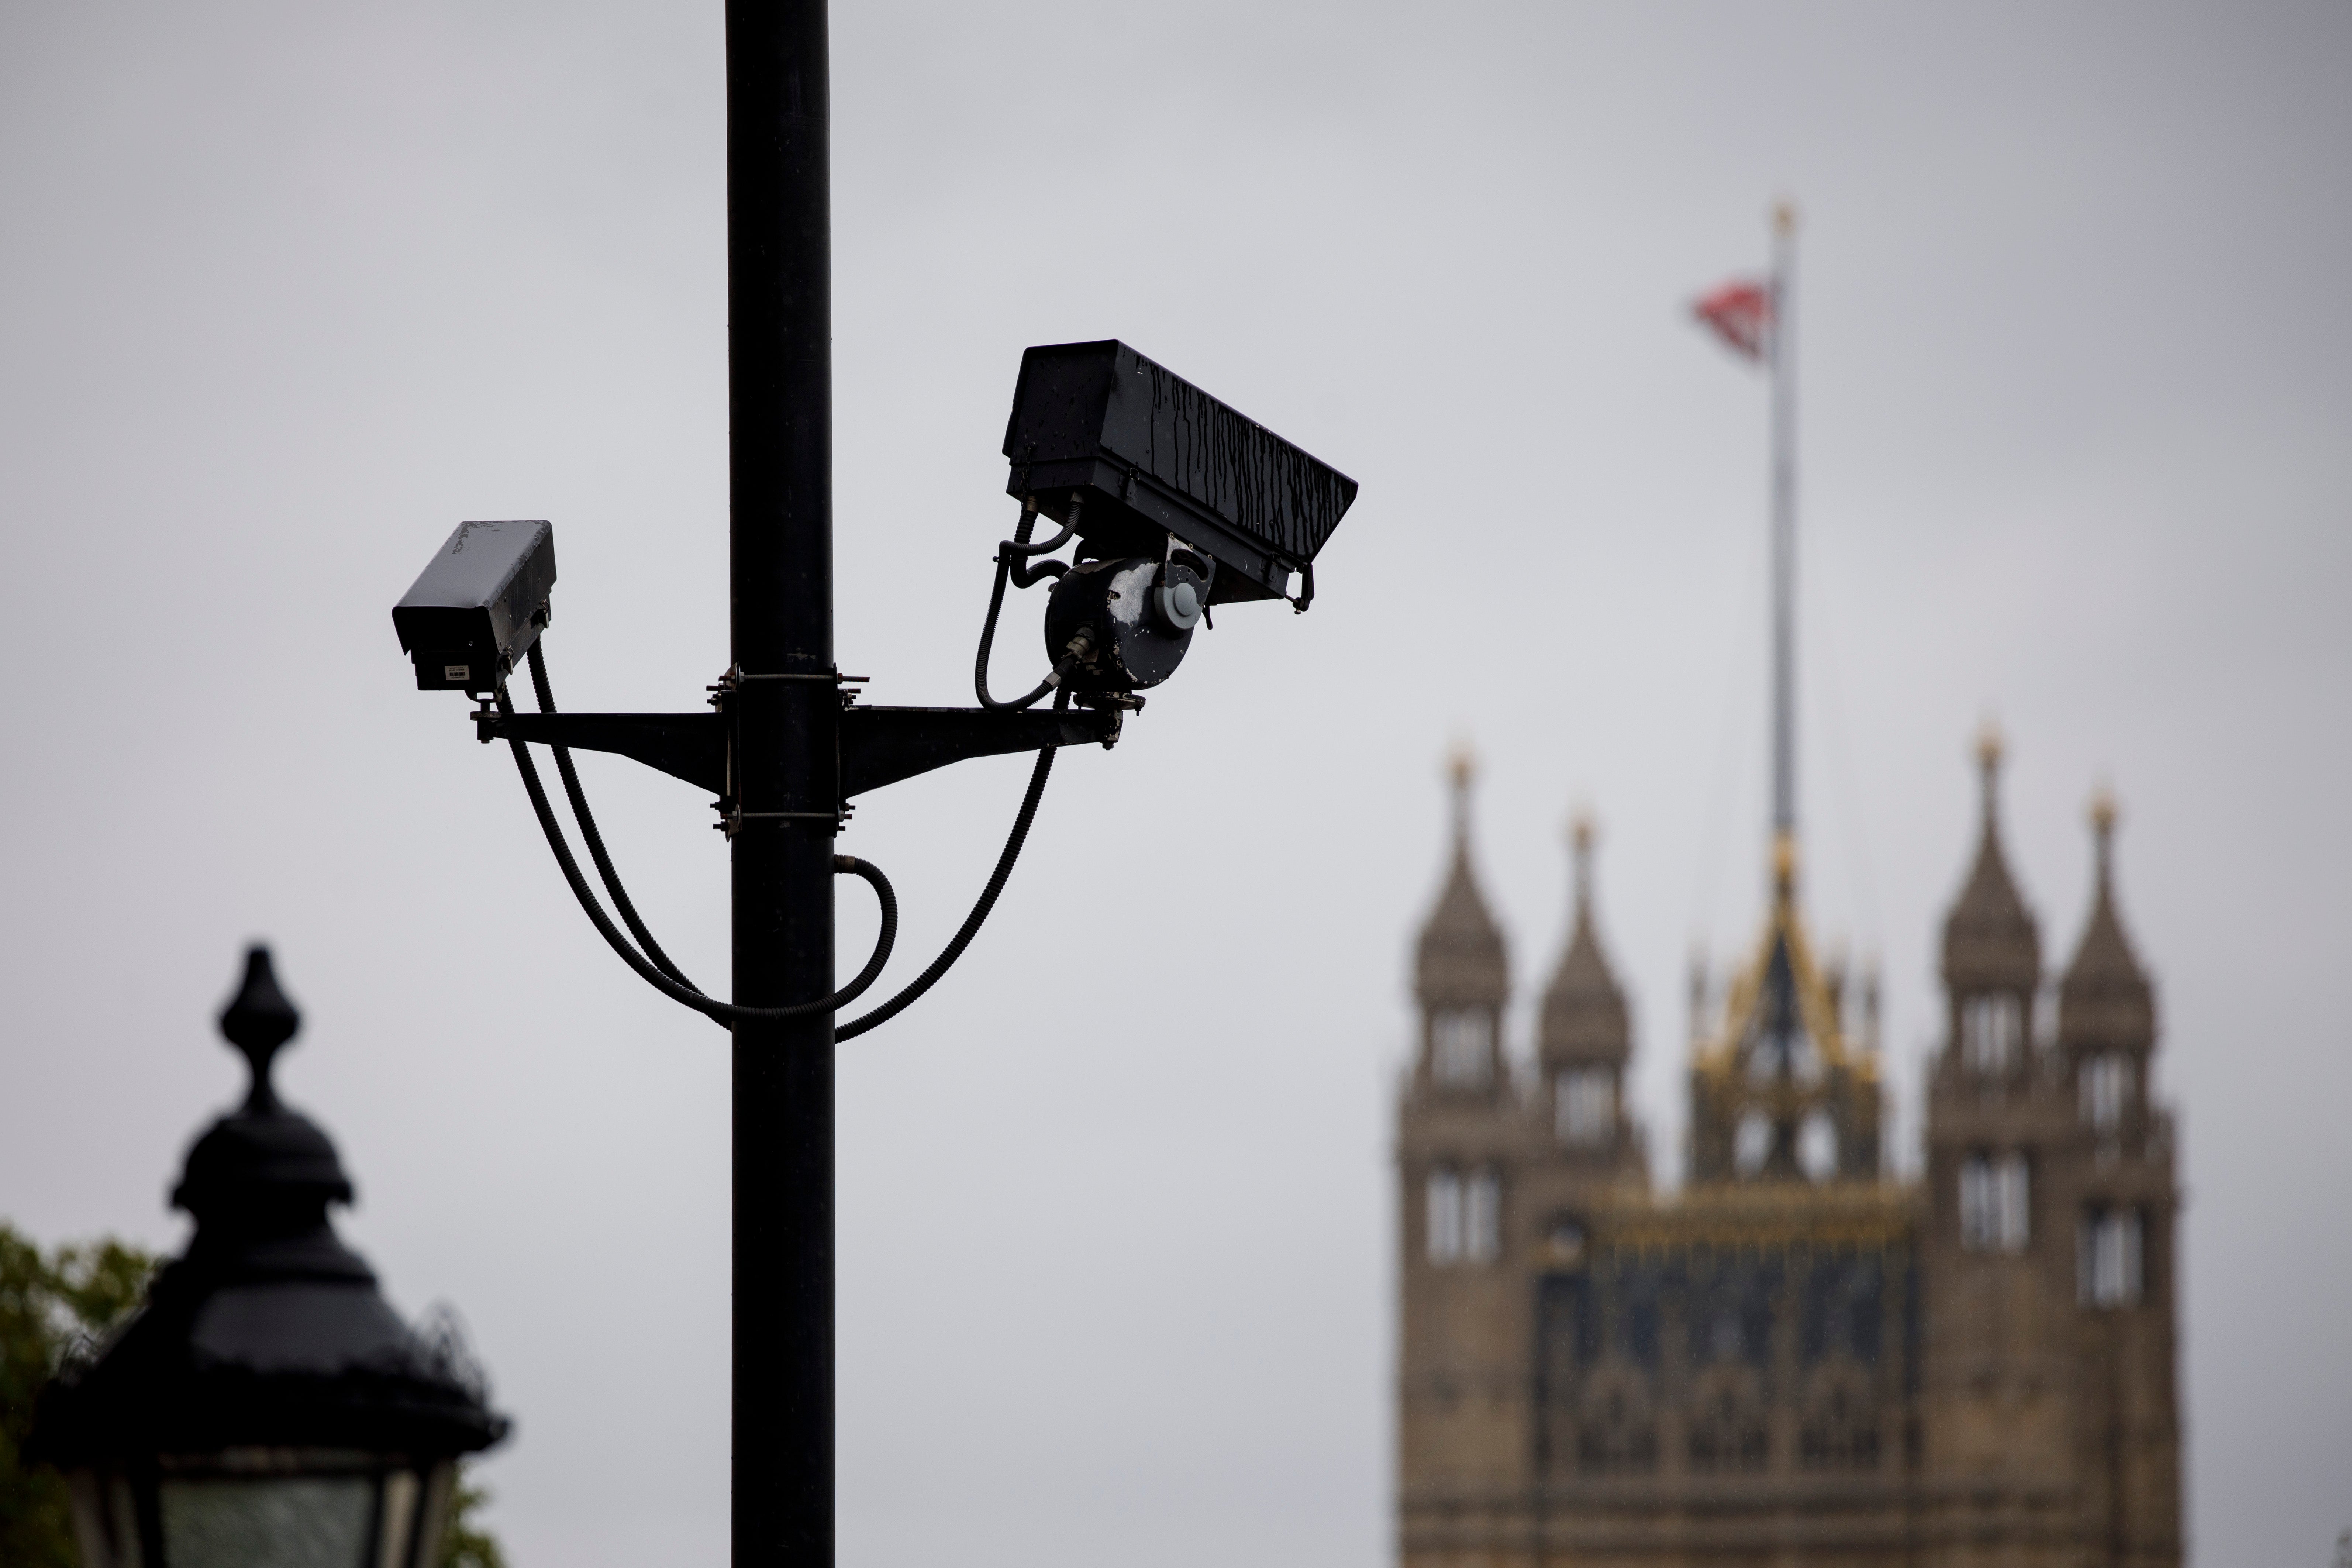 Camera positioned outside the Palace of Westminster in London